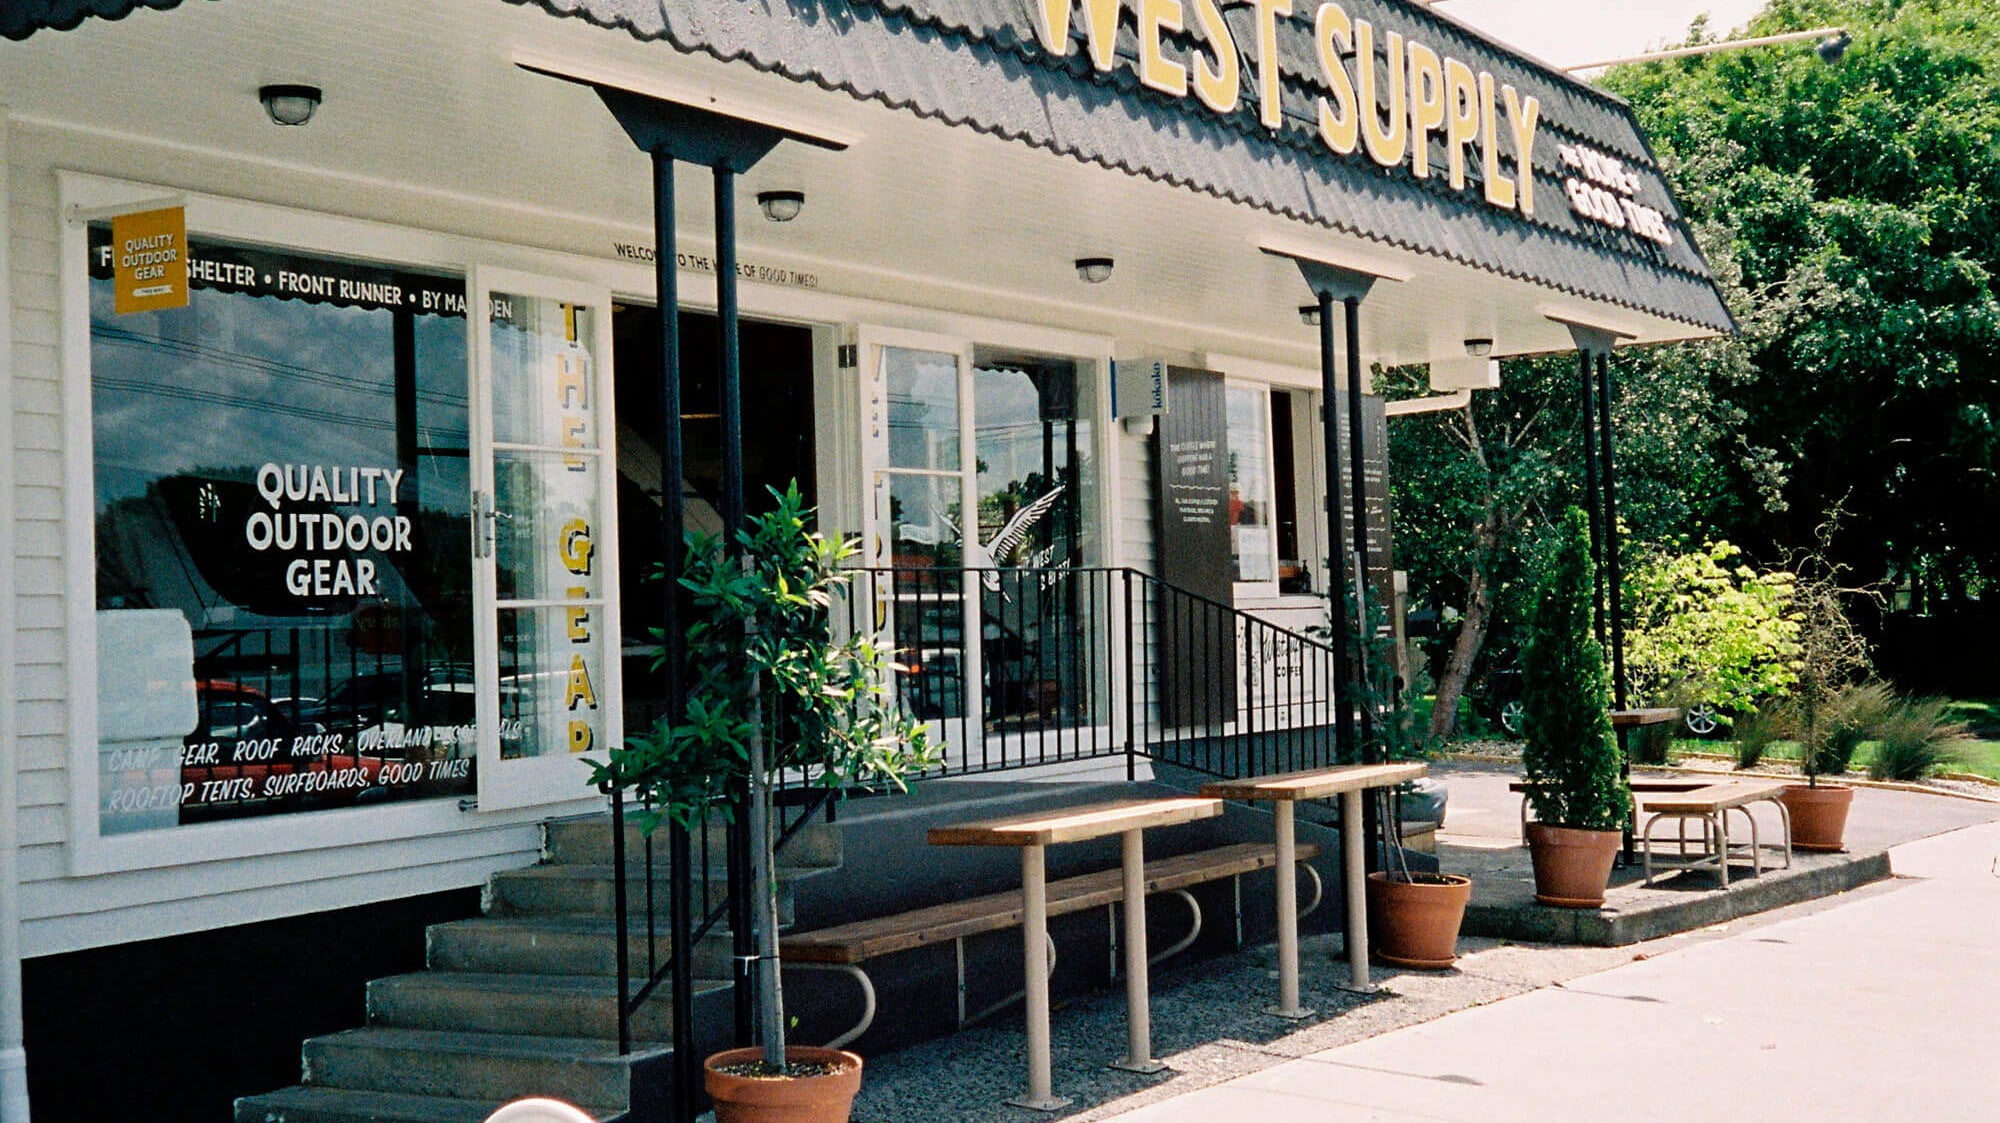 A Tour of the West Supply Store